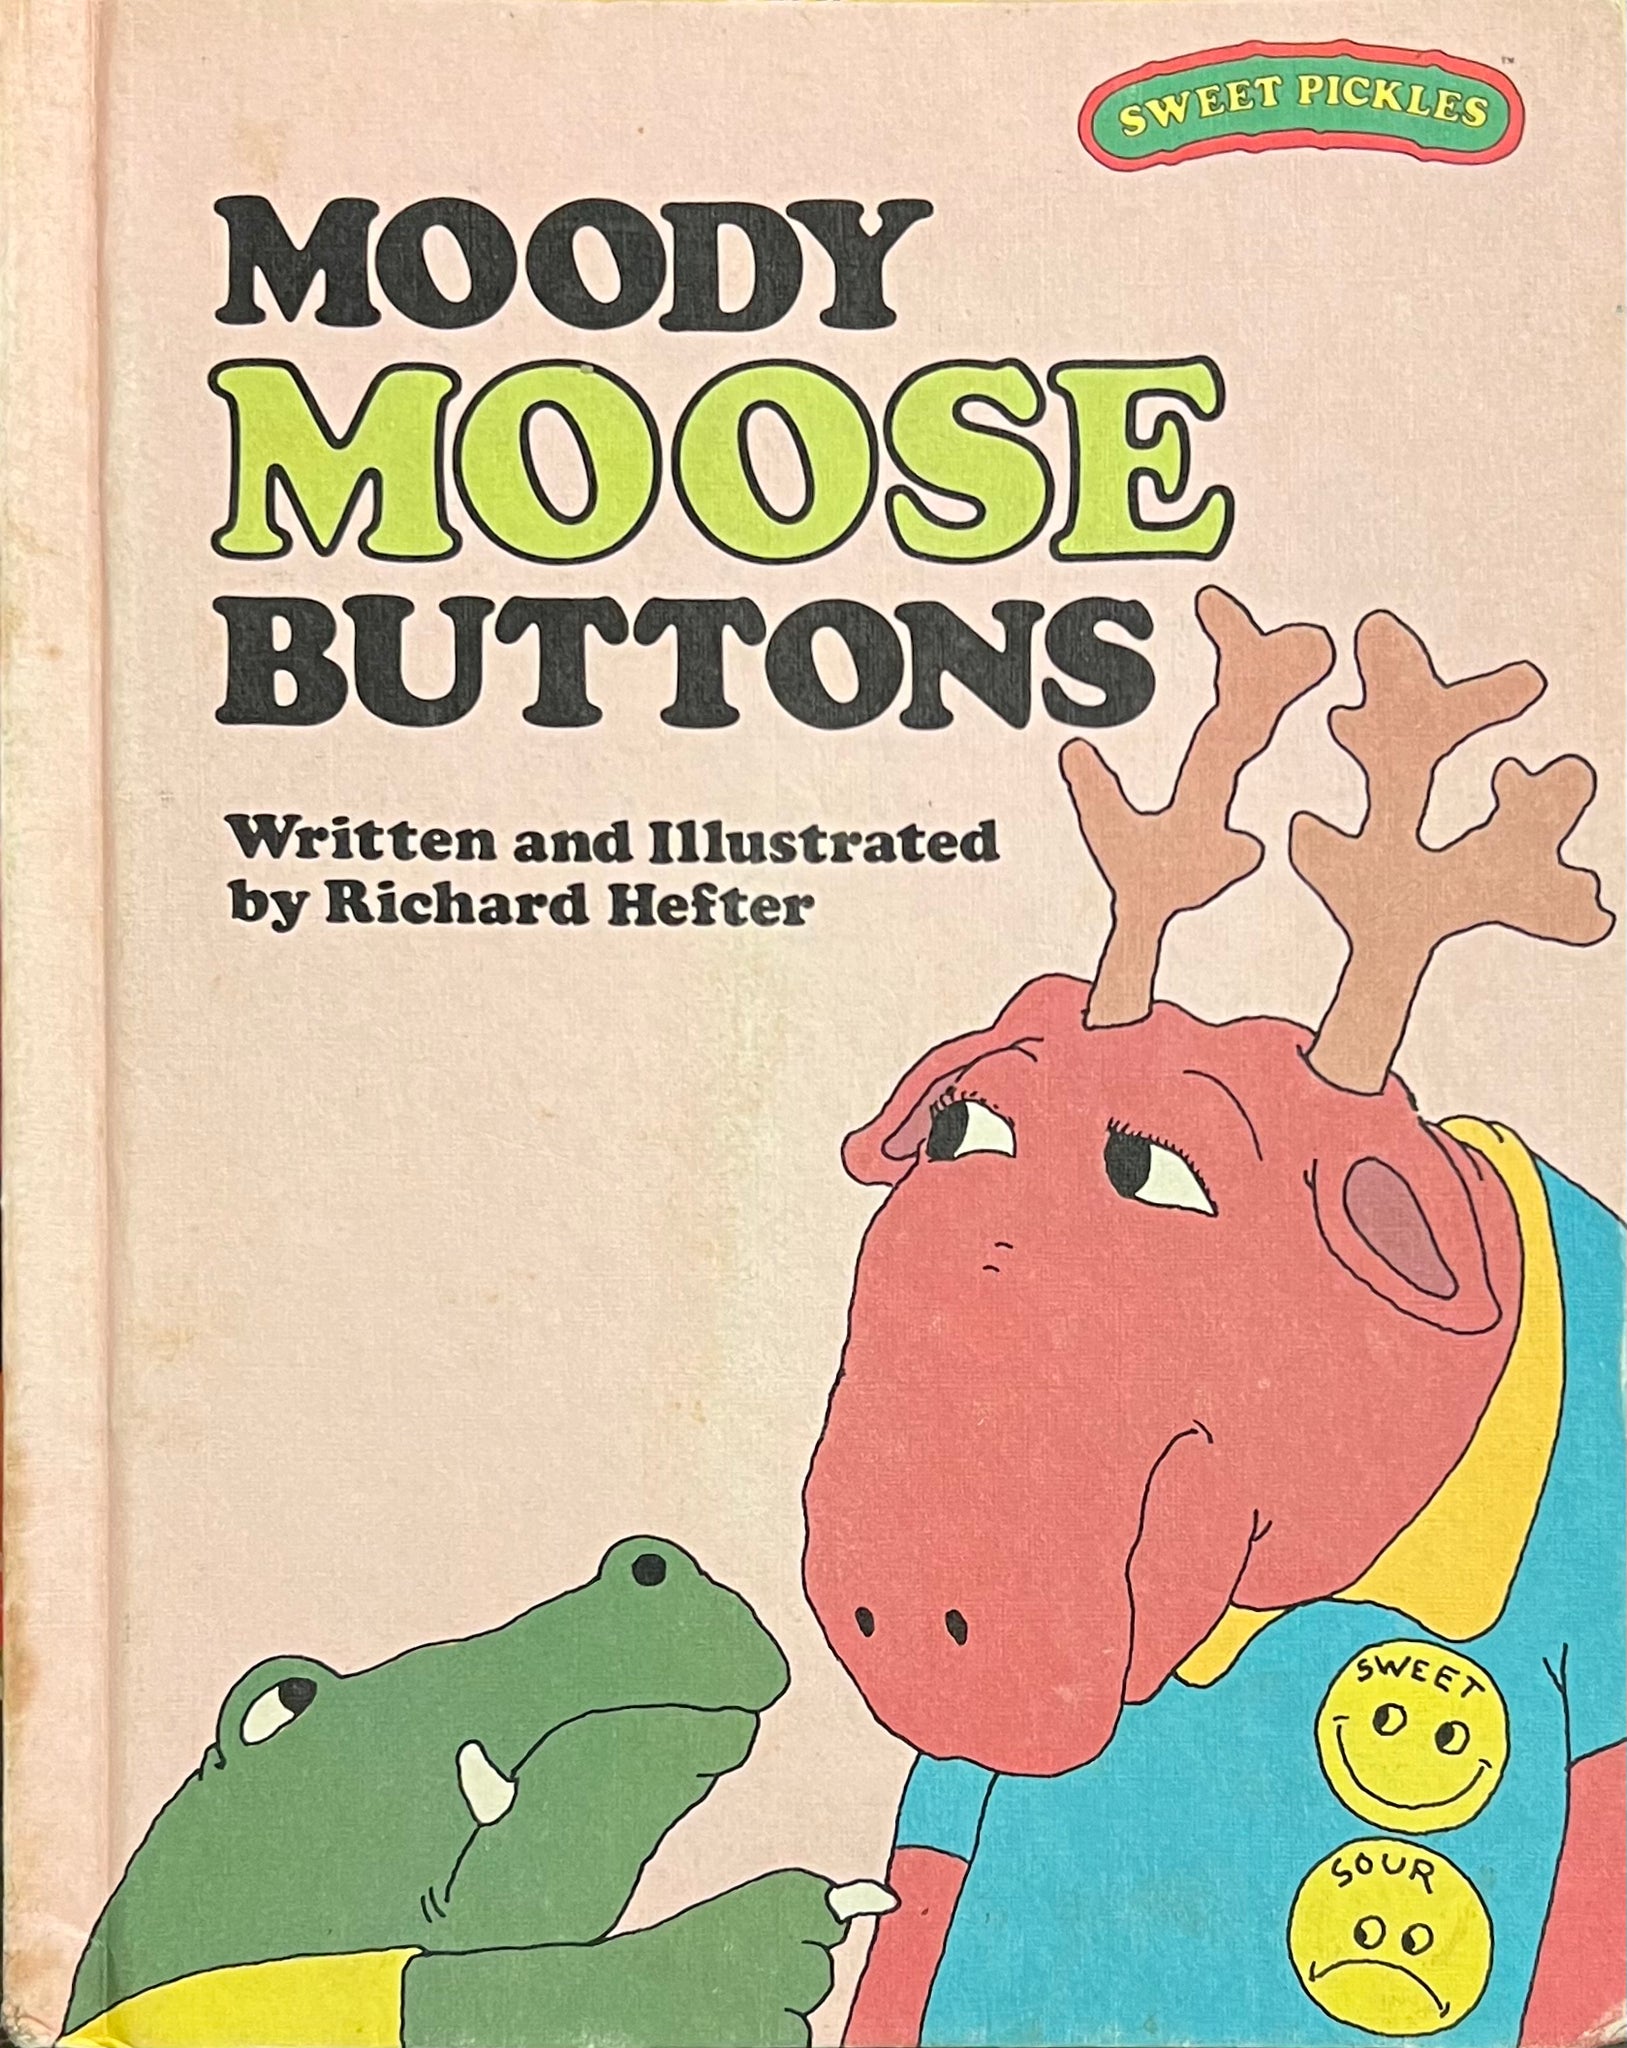 Moody Moose Buttons (Sweet Pickles), Richard Hefter